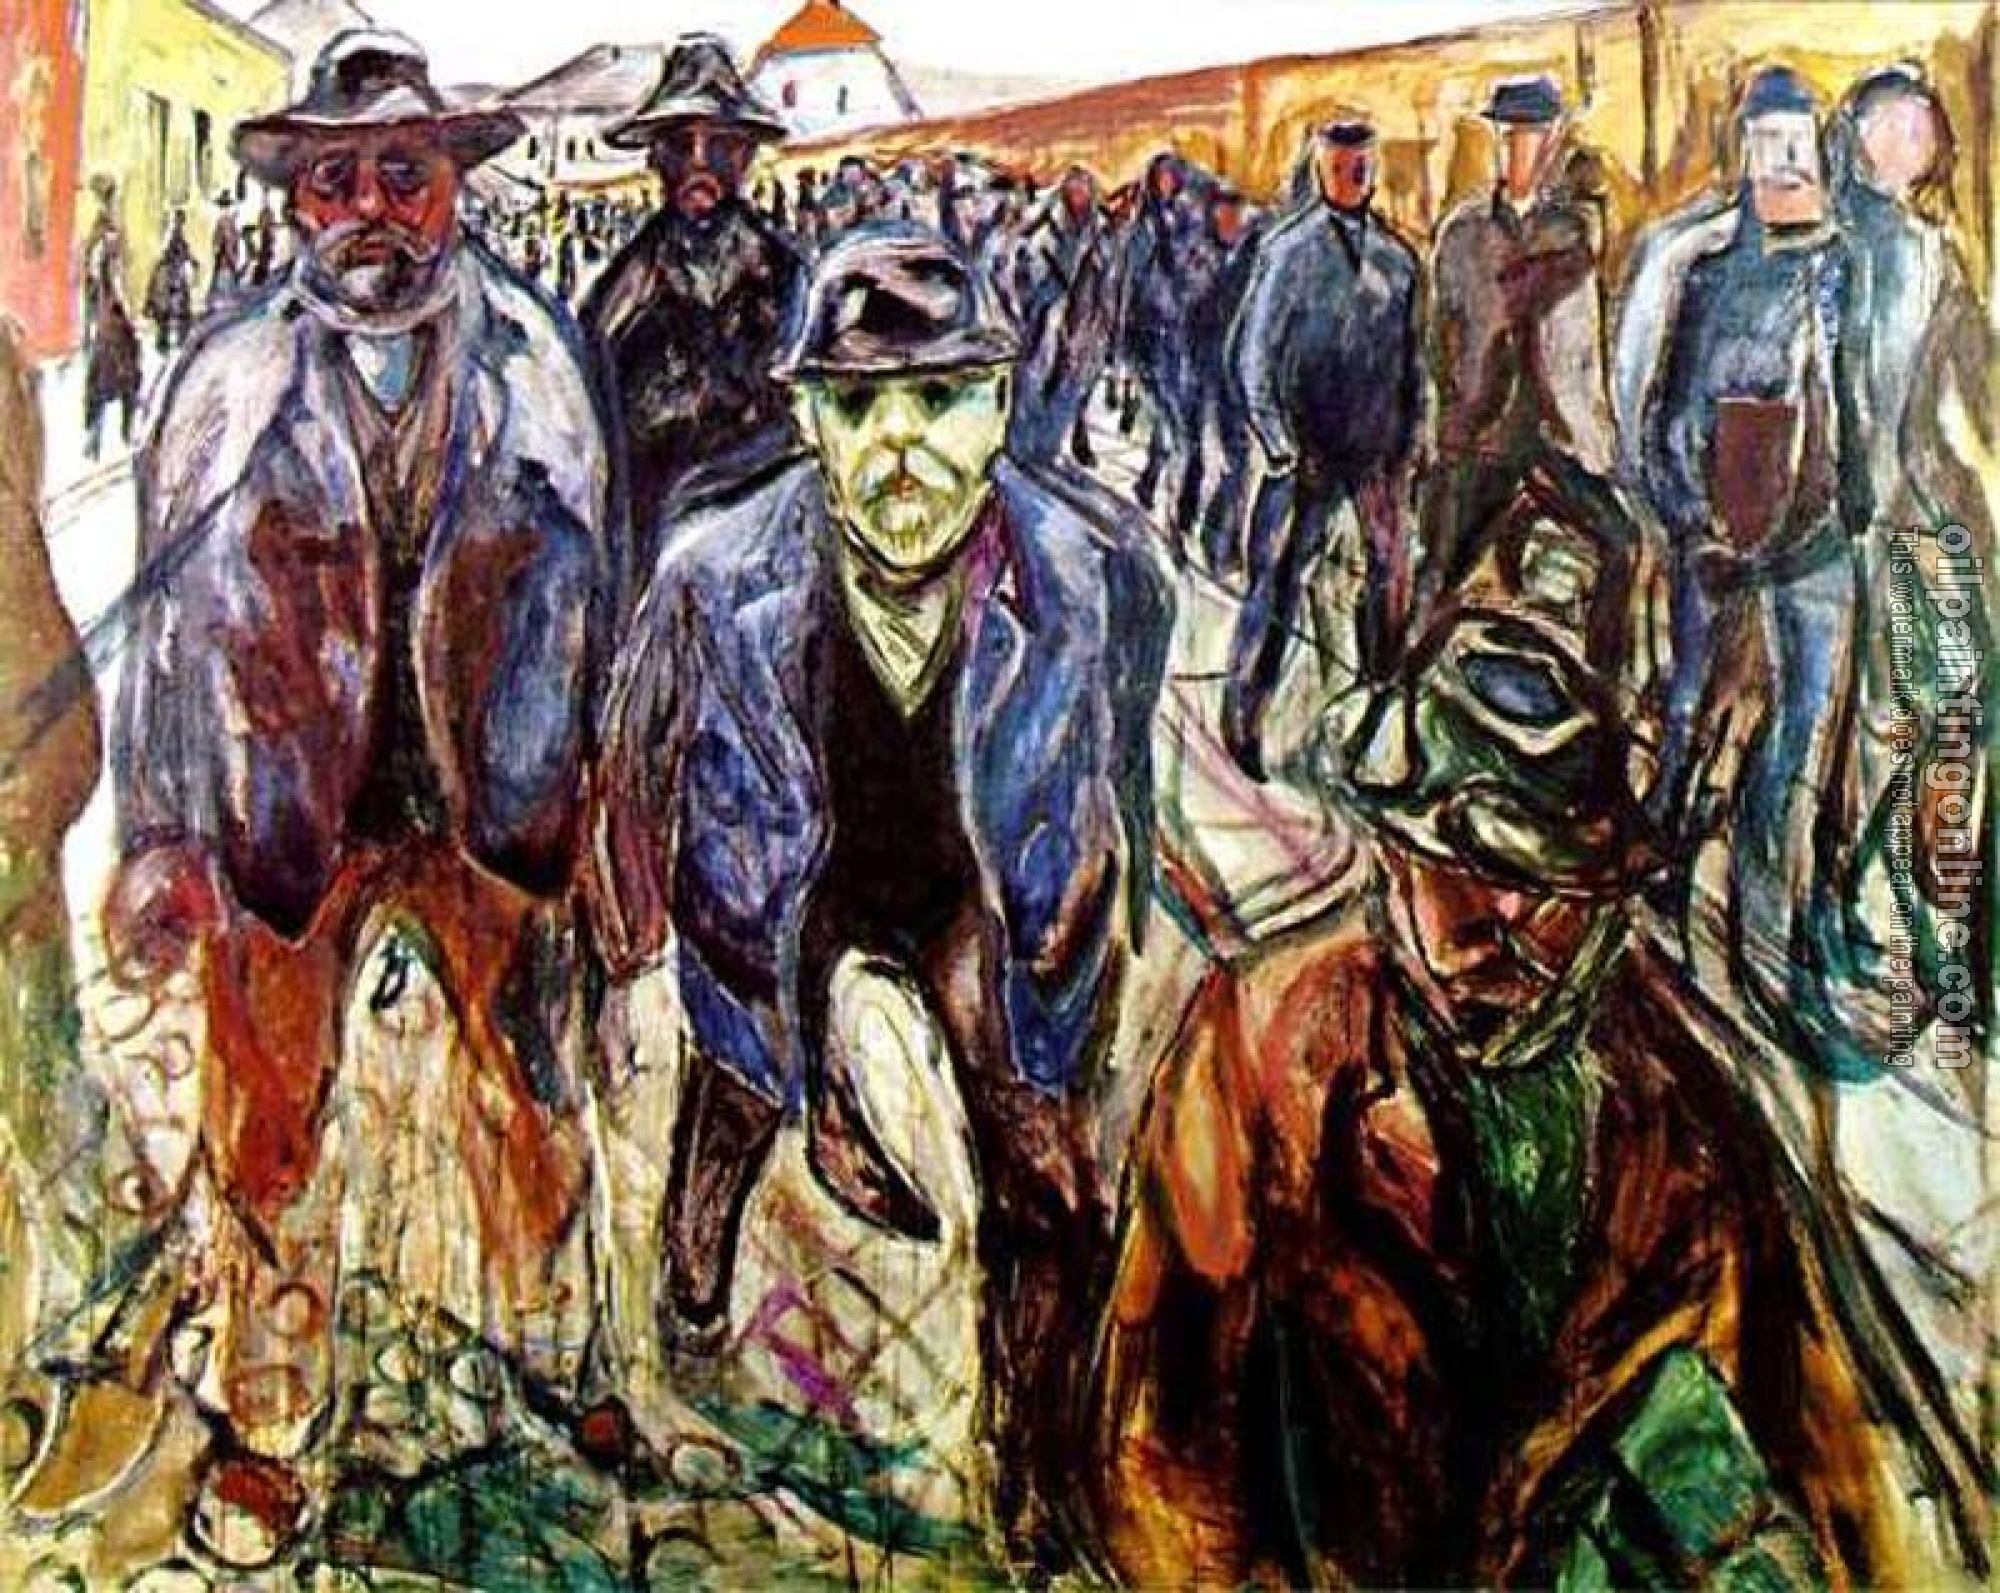 Munch, Edvard - Workers on Their Way Home